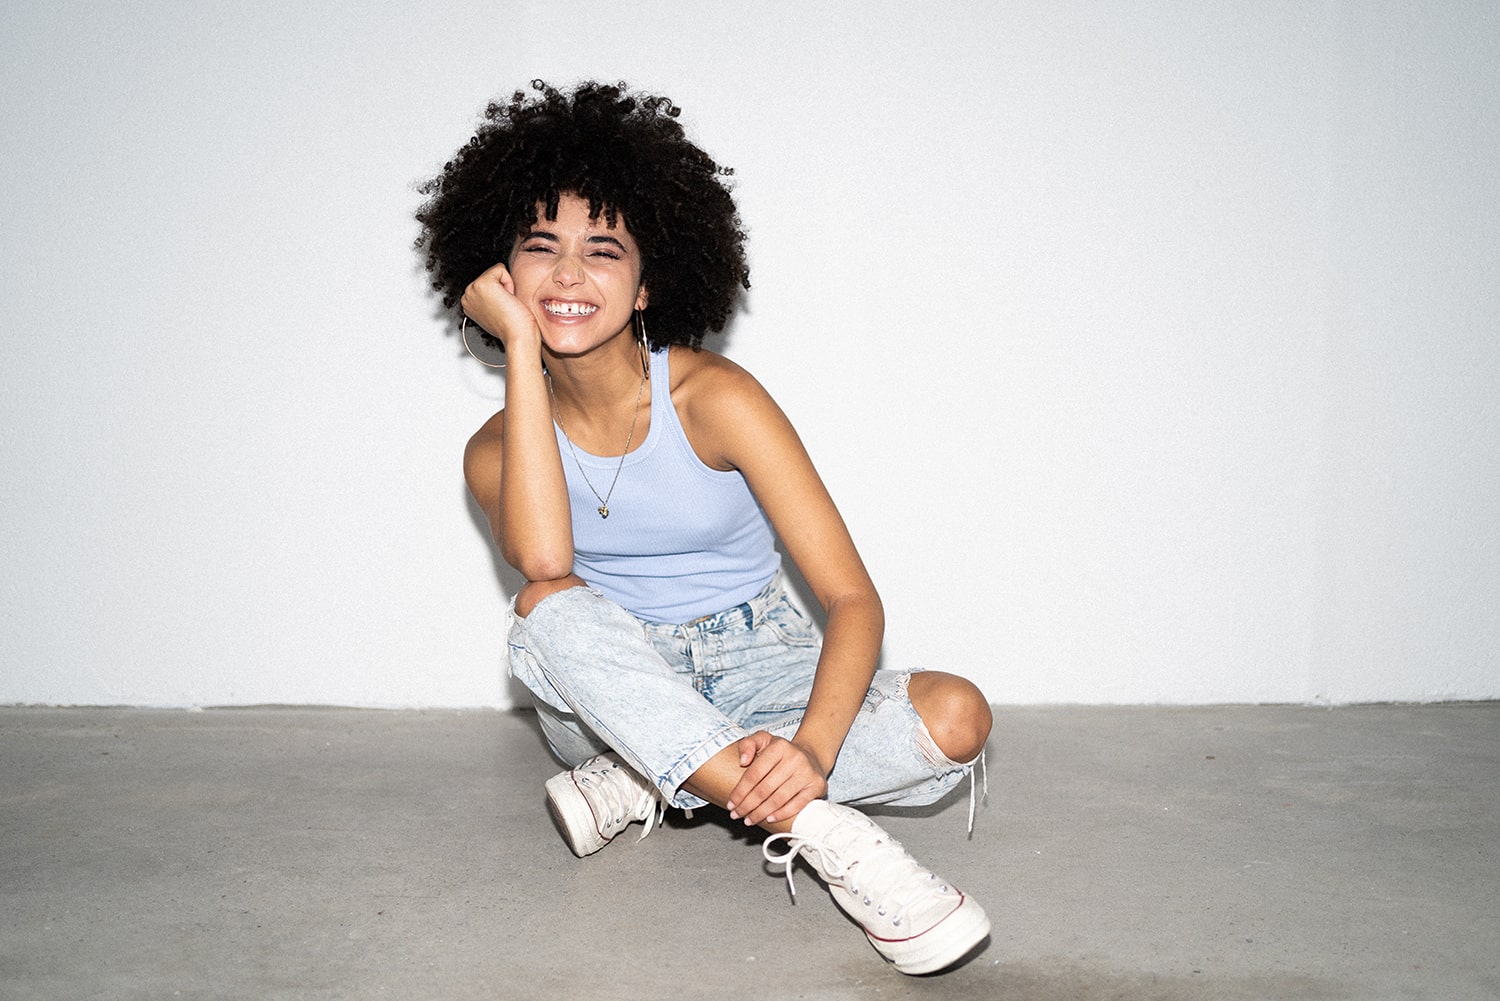 Full length shot of a curly-haired model with a radiant smile, looking directly at the camera. The model is seated in an Indian sit position, also known as a cross-legged sitting position, with one hand resting on her cheeks.